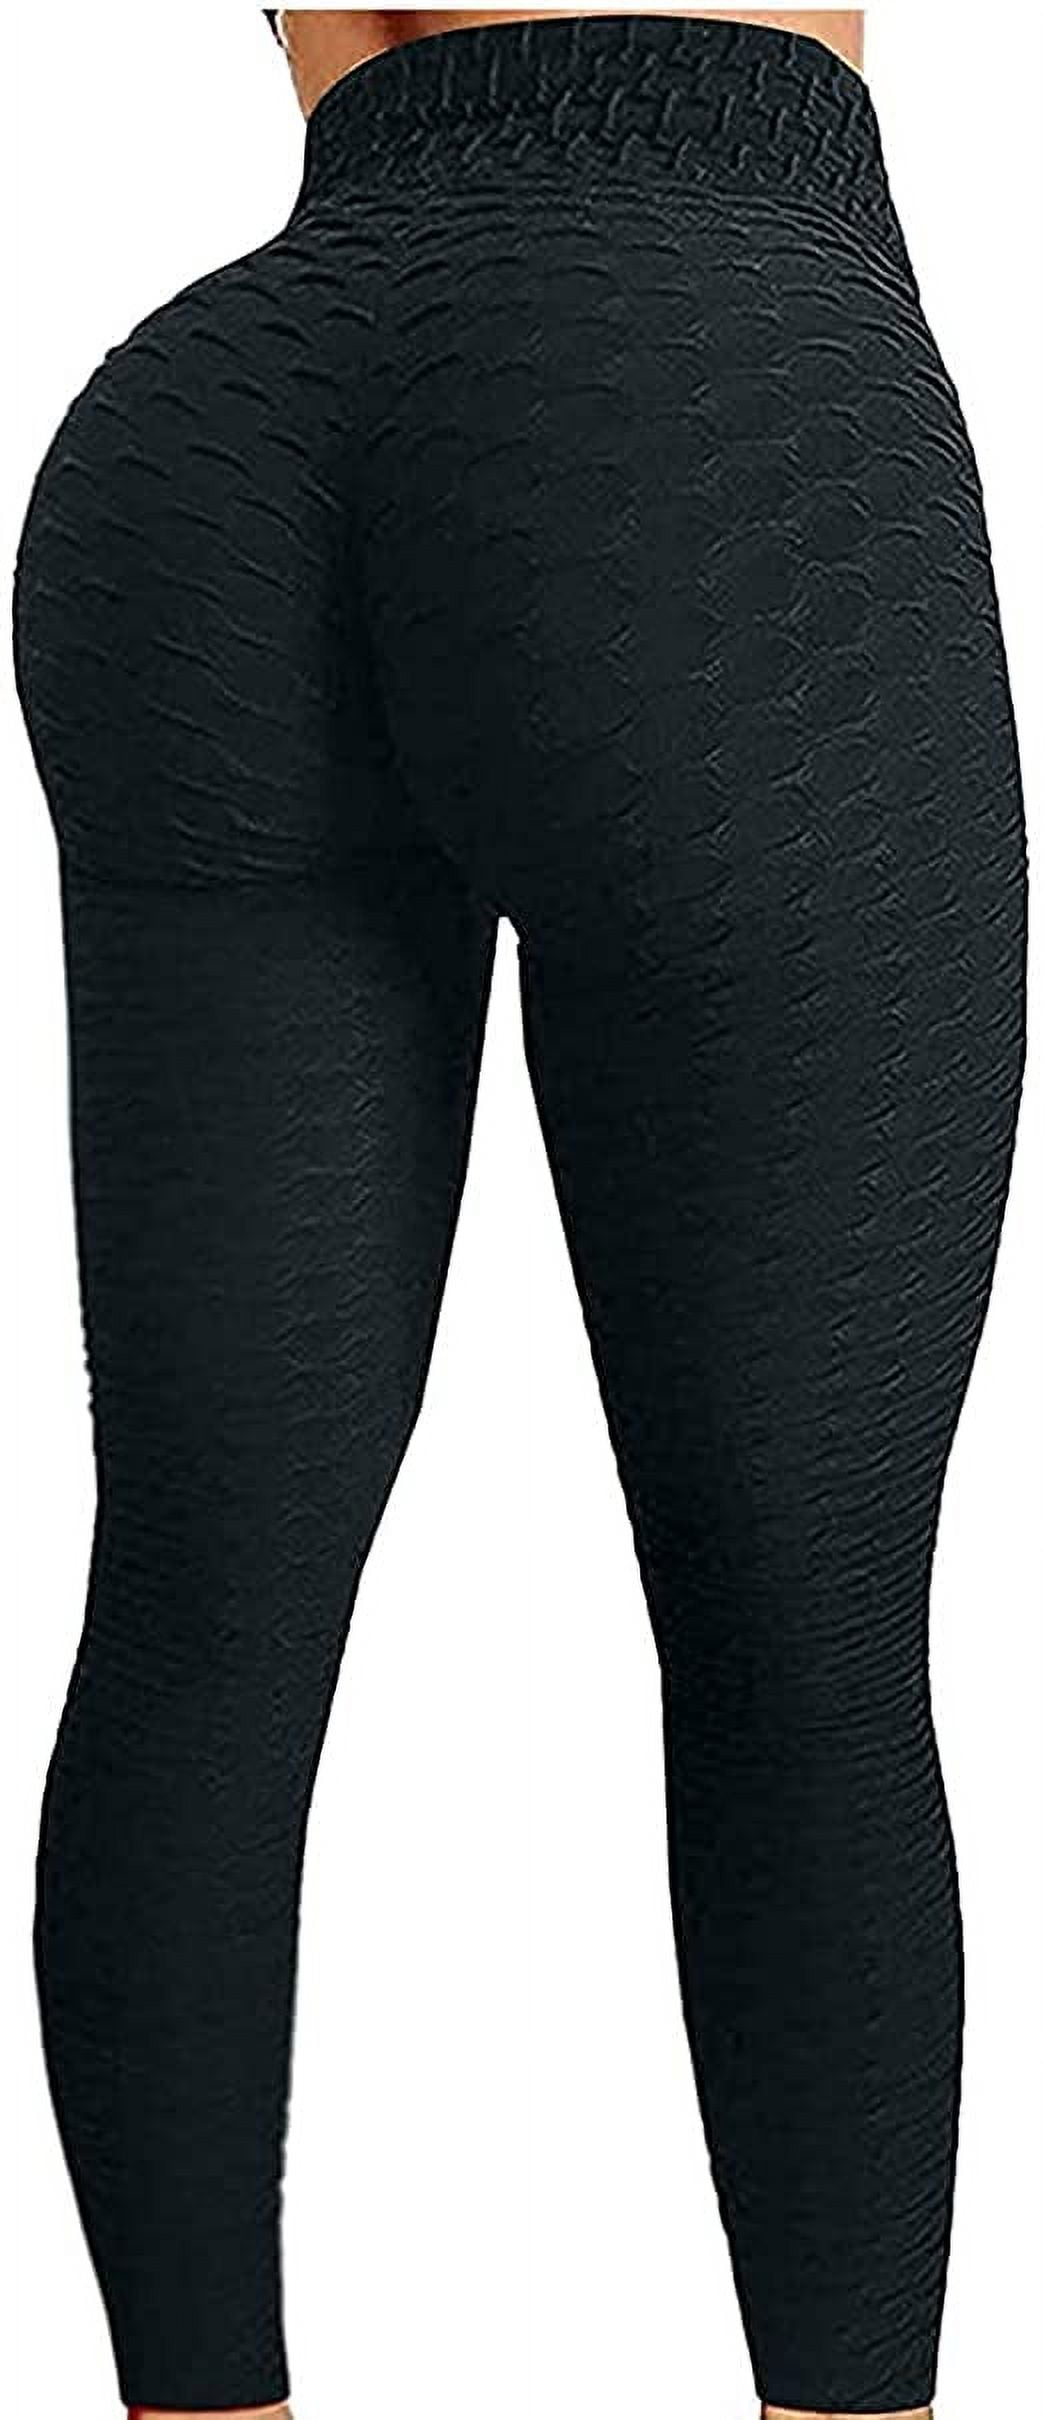 TIK Tok Leggings for Women High Waisted Yoga Pants Tummy Control Butt  Lifting Workout Running Tights